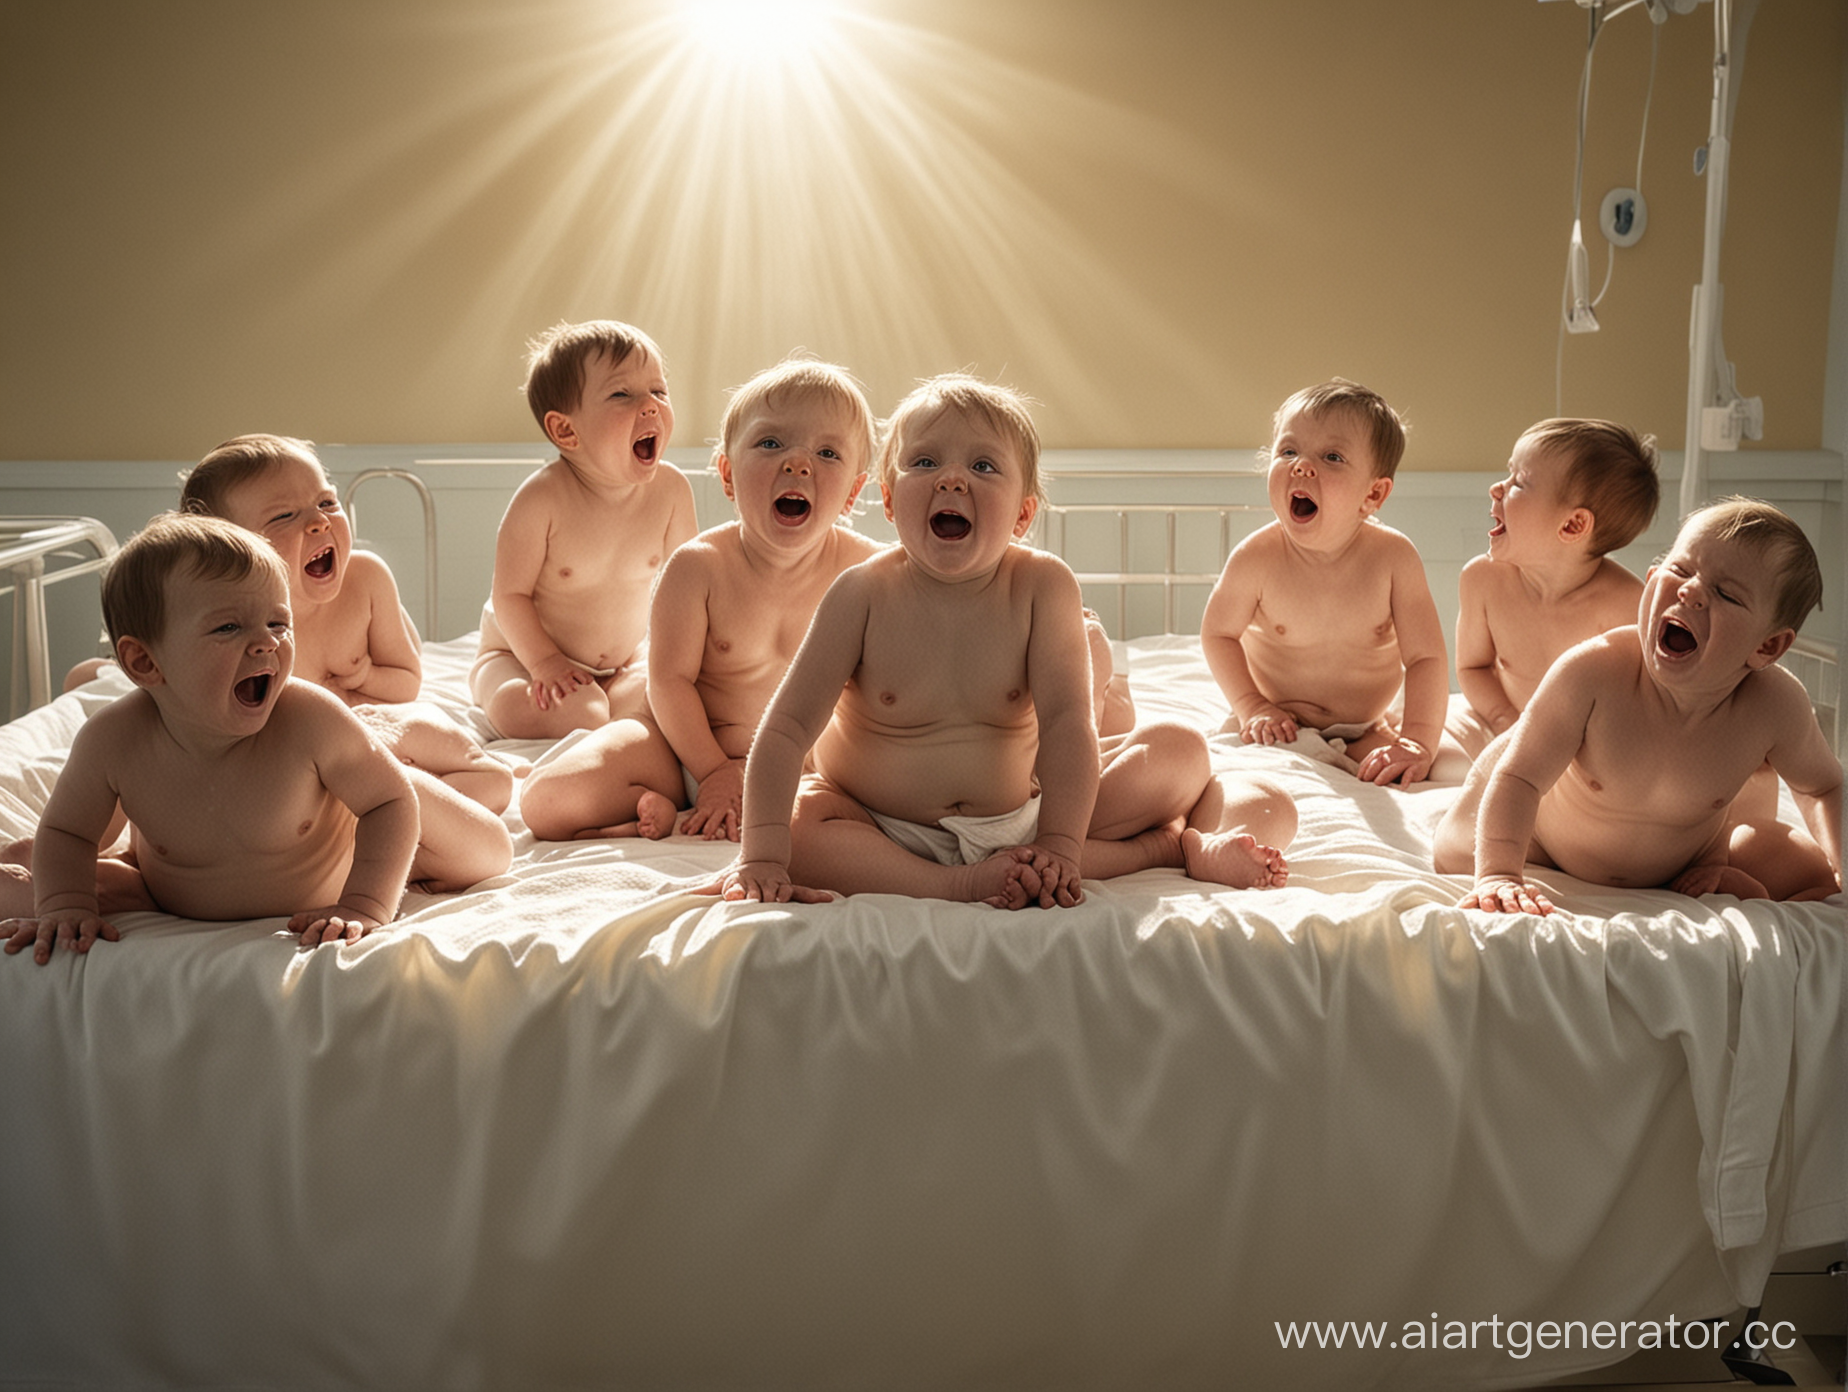 A spectacular, realistic anatomically correct, emotional image on a maternity hospital table illuminated by rays of sunlight, five screaming babies lie naked, in diapers, alone without adults and staff.